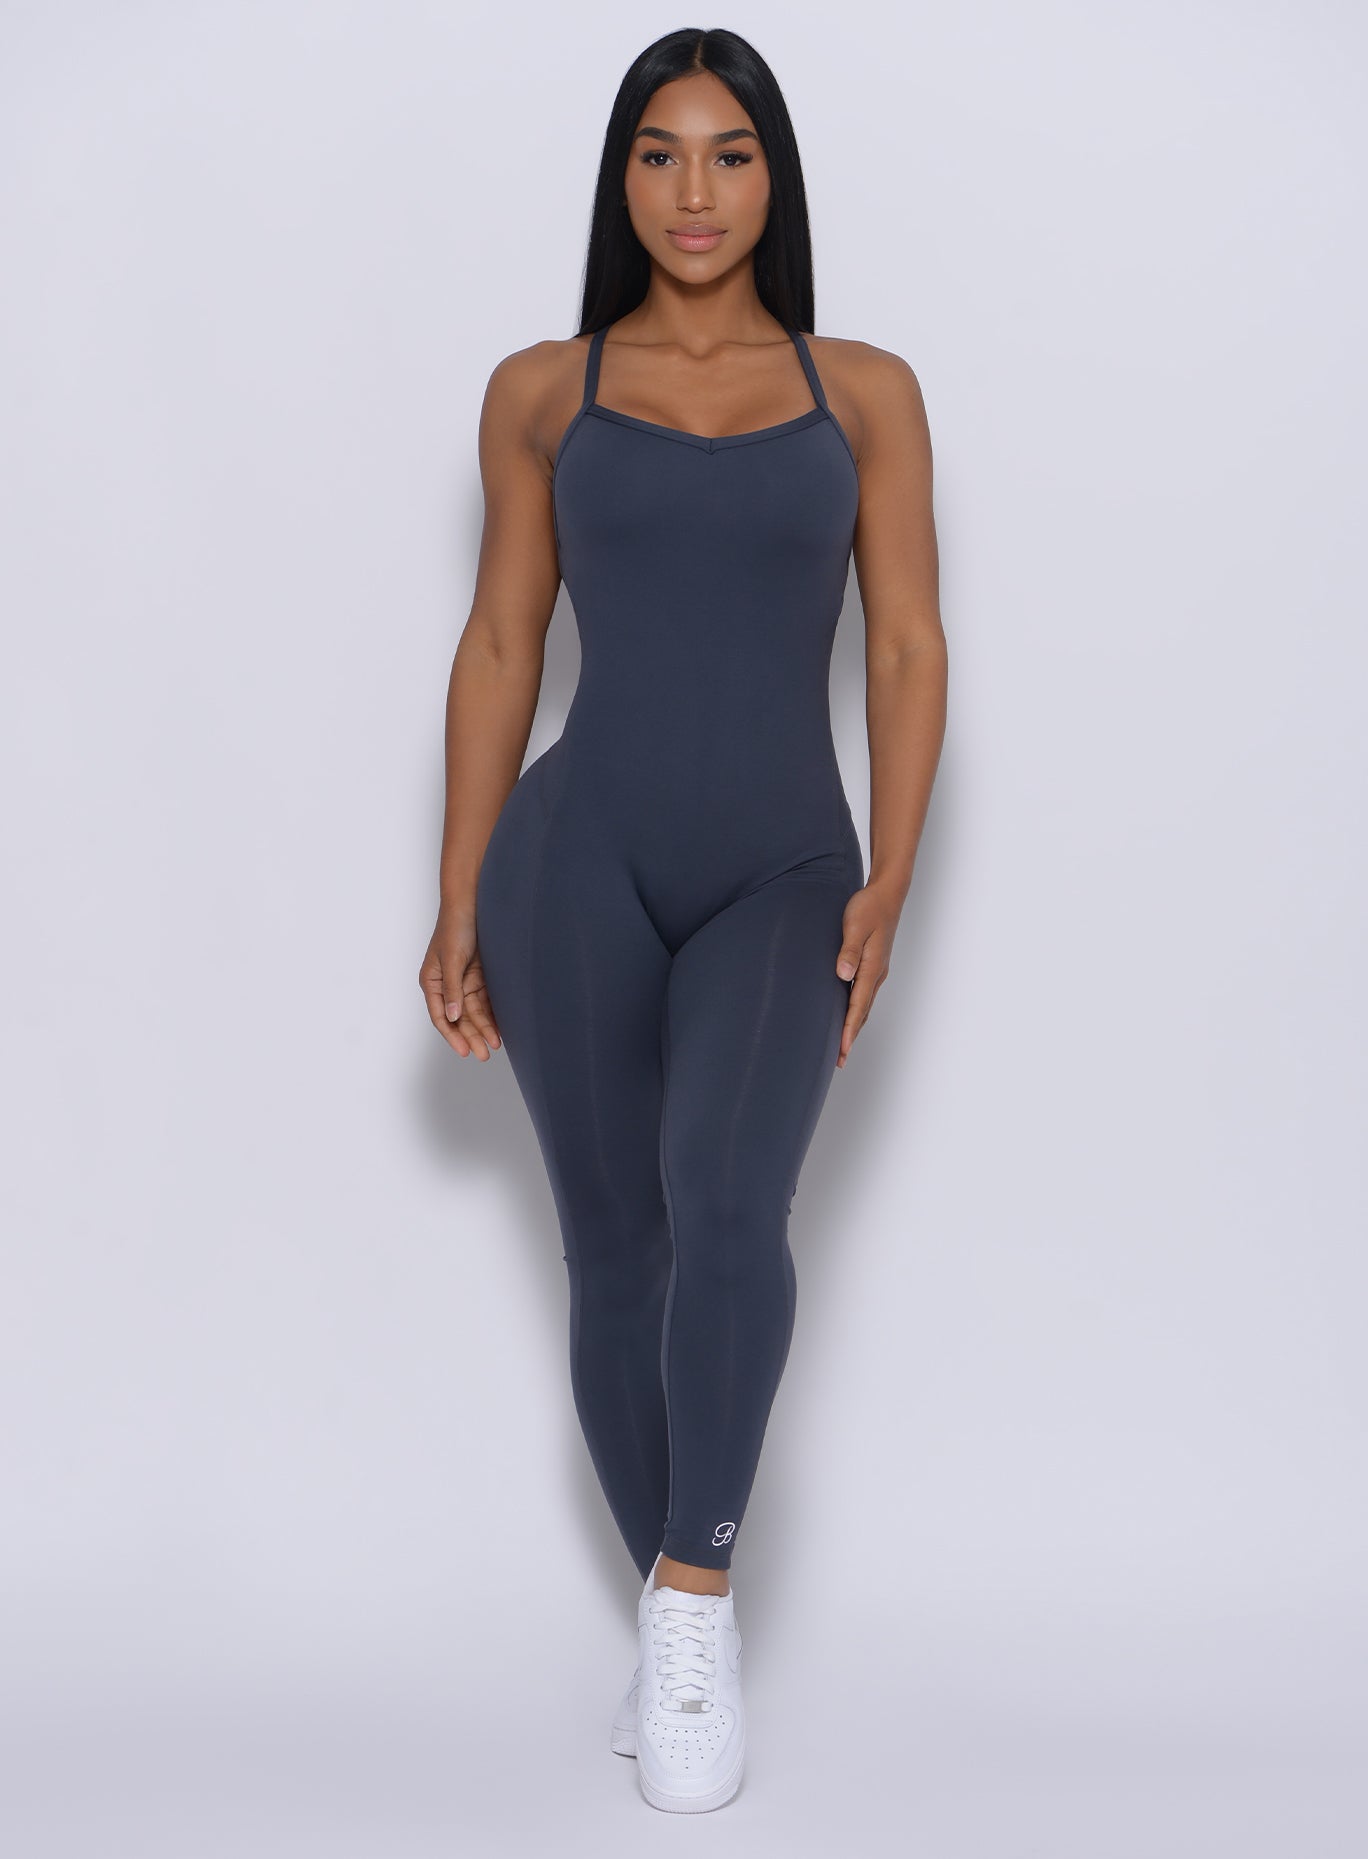 front profile view of a model in our sculpted bodysuit in summit gray color